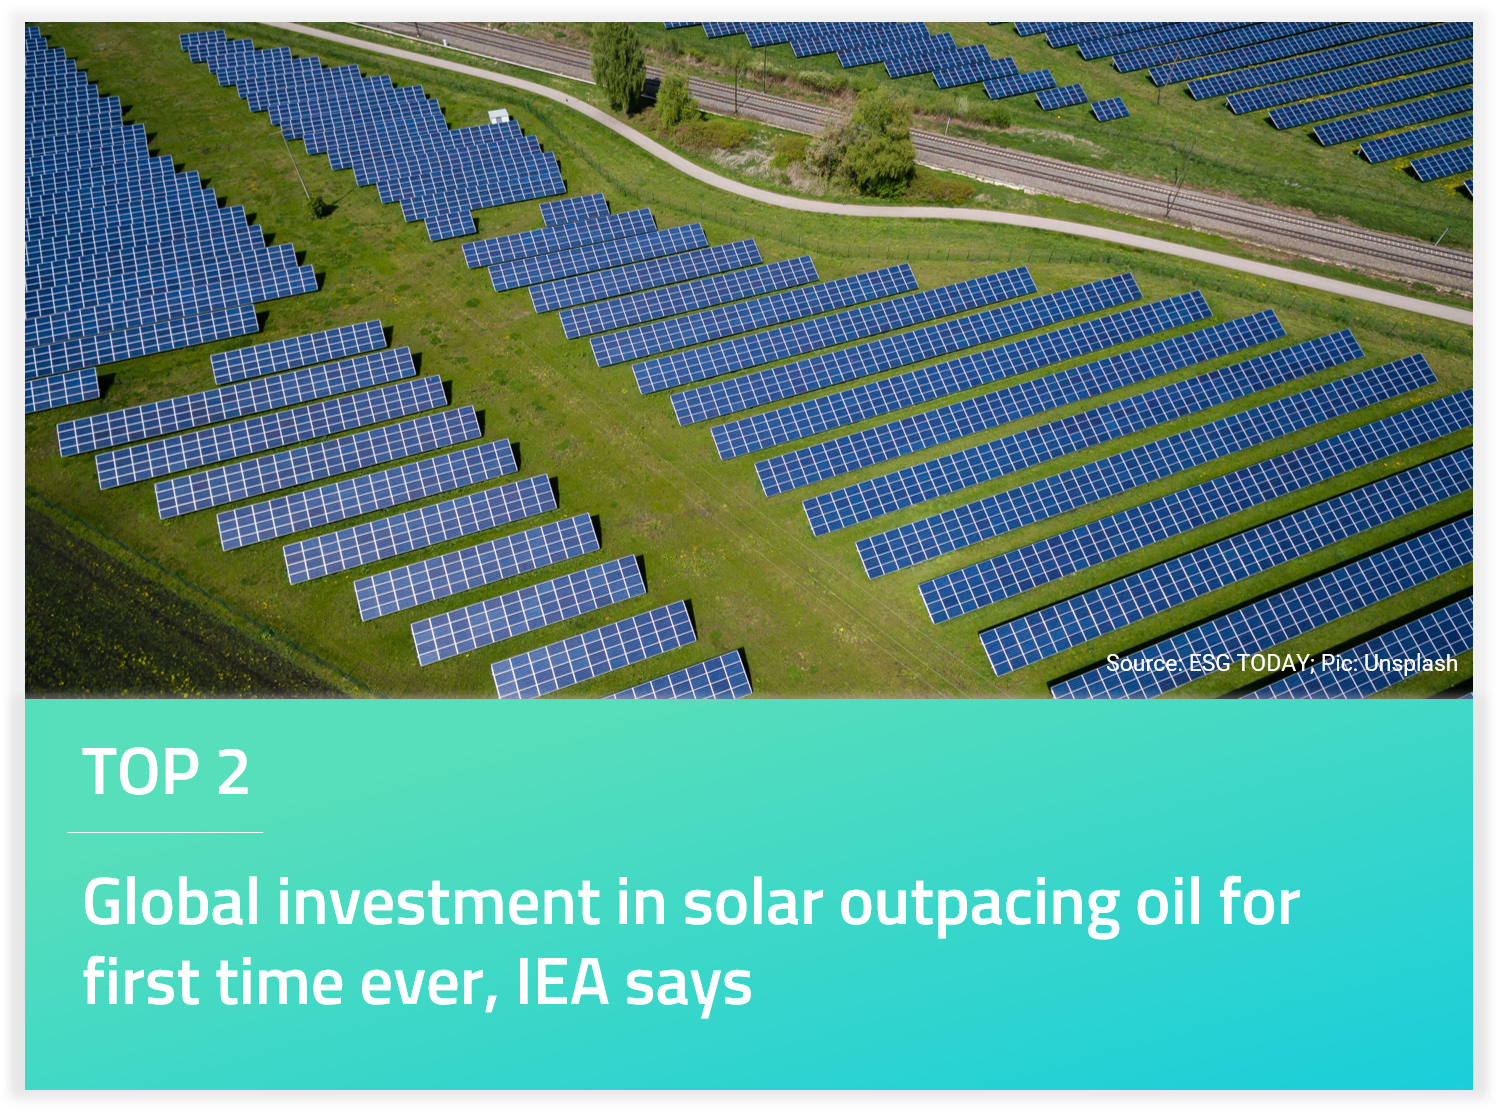 Global investment in solar outpacing oil for first time ever, IEA says